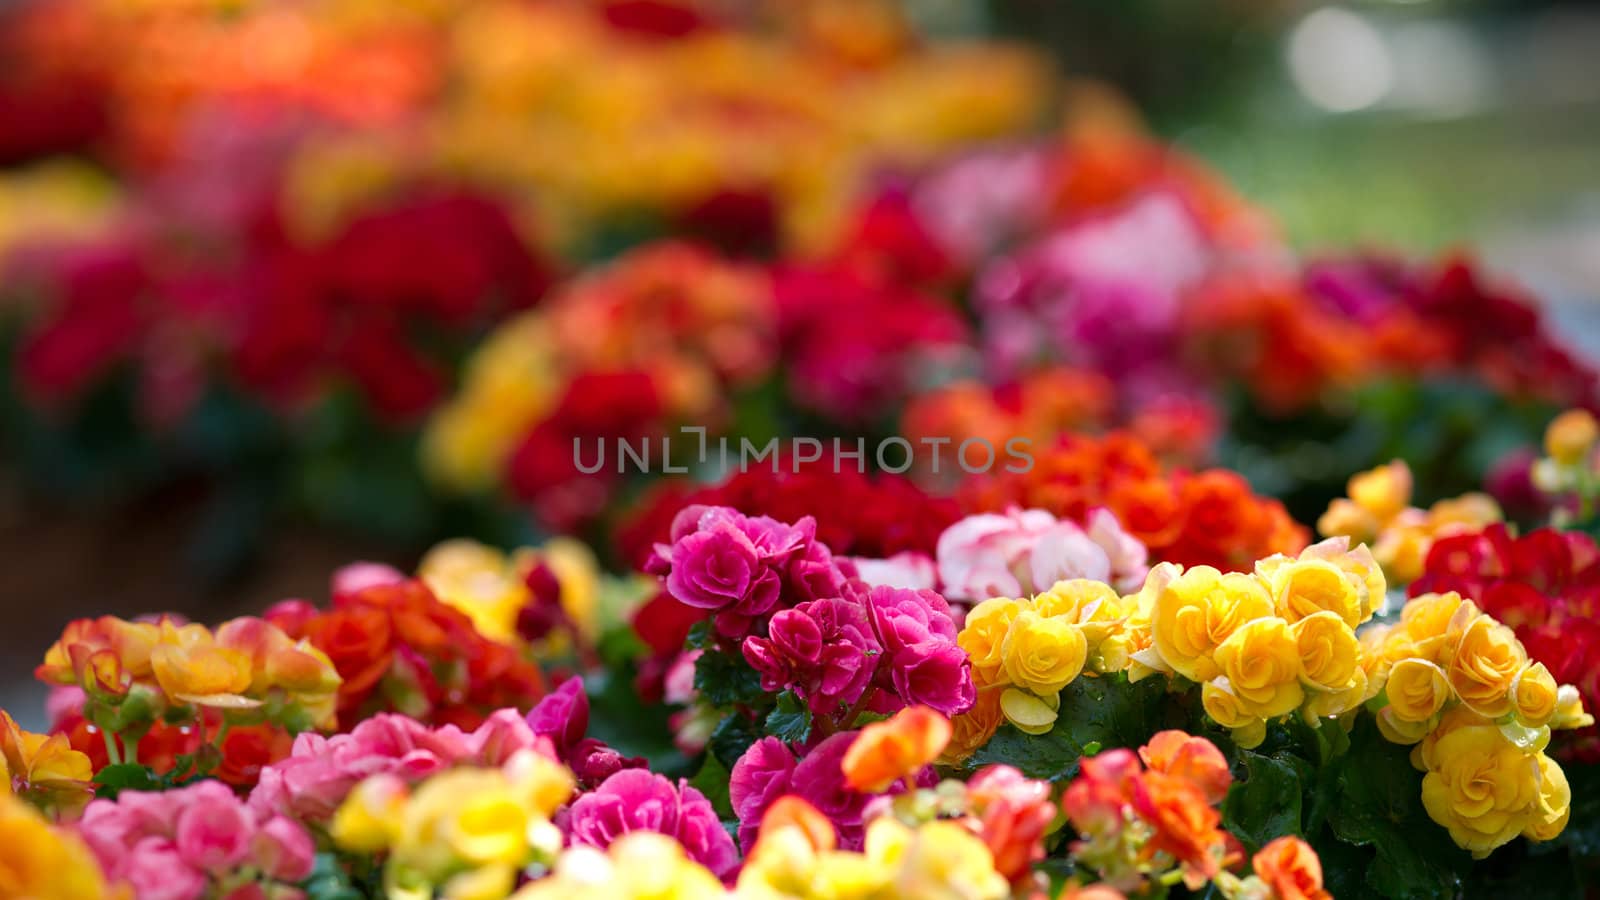 Flowerbed with multicolored flowers